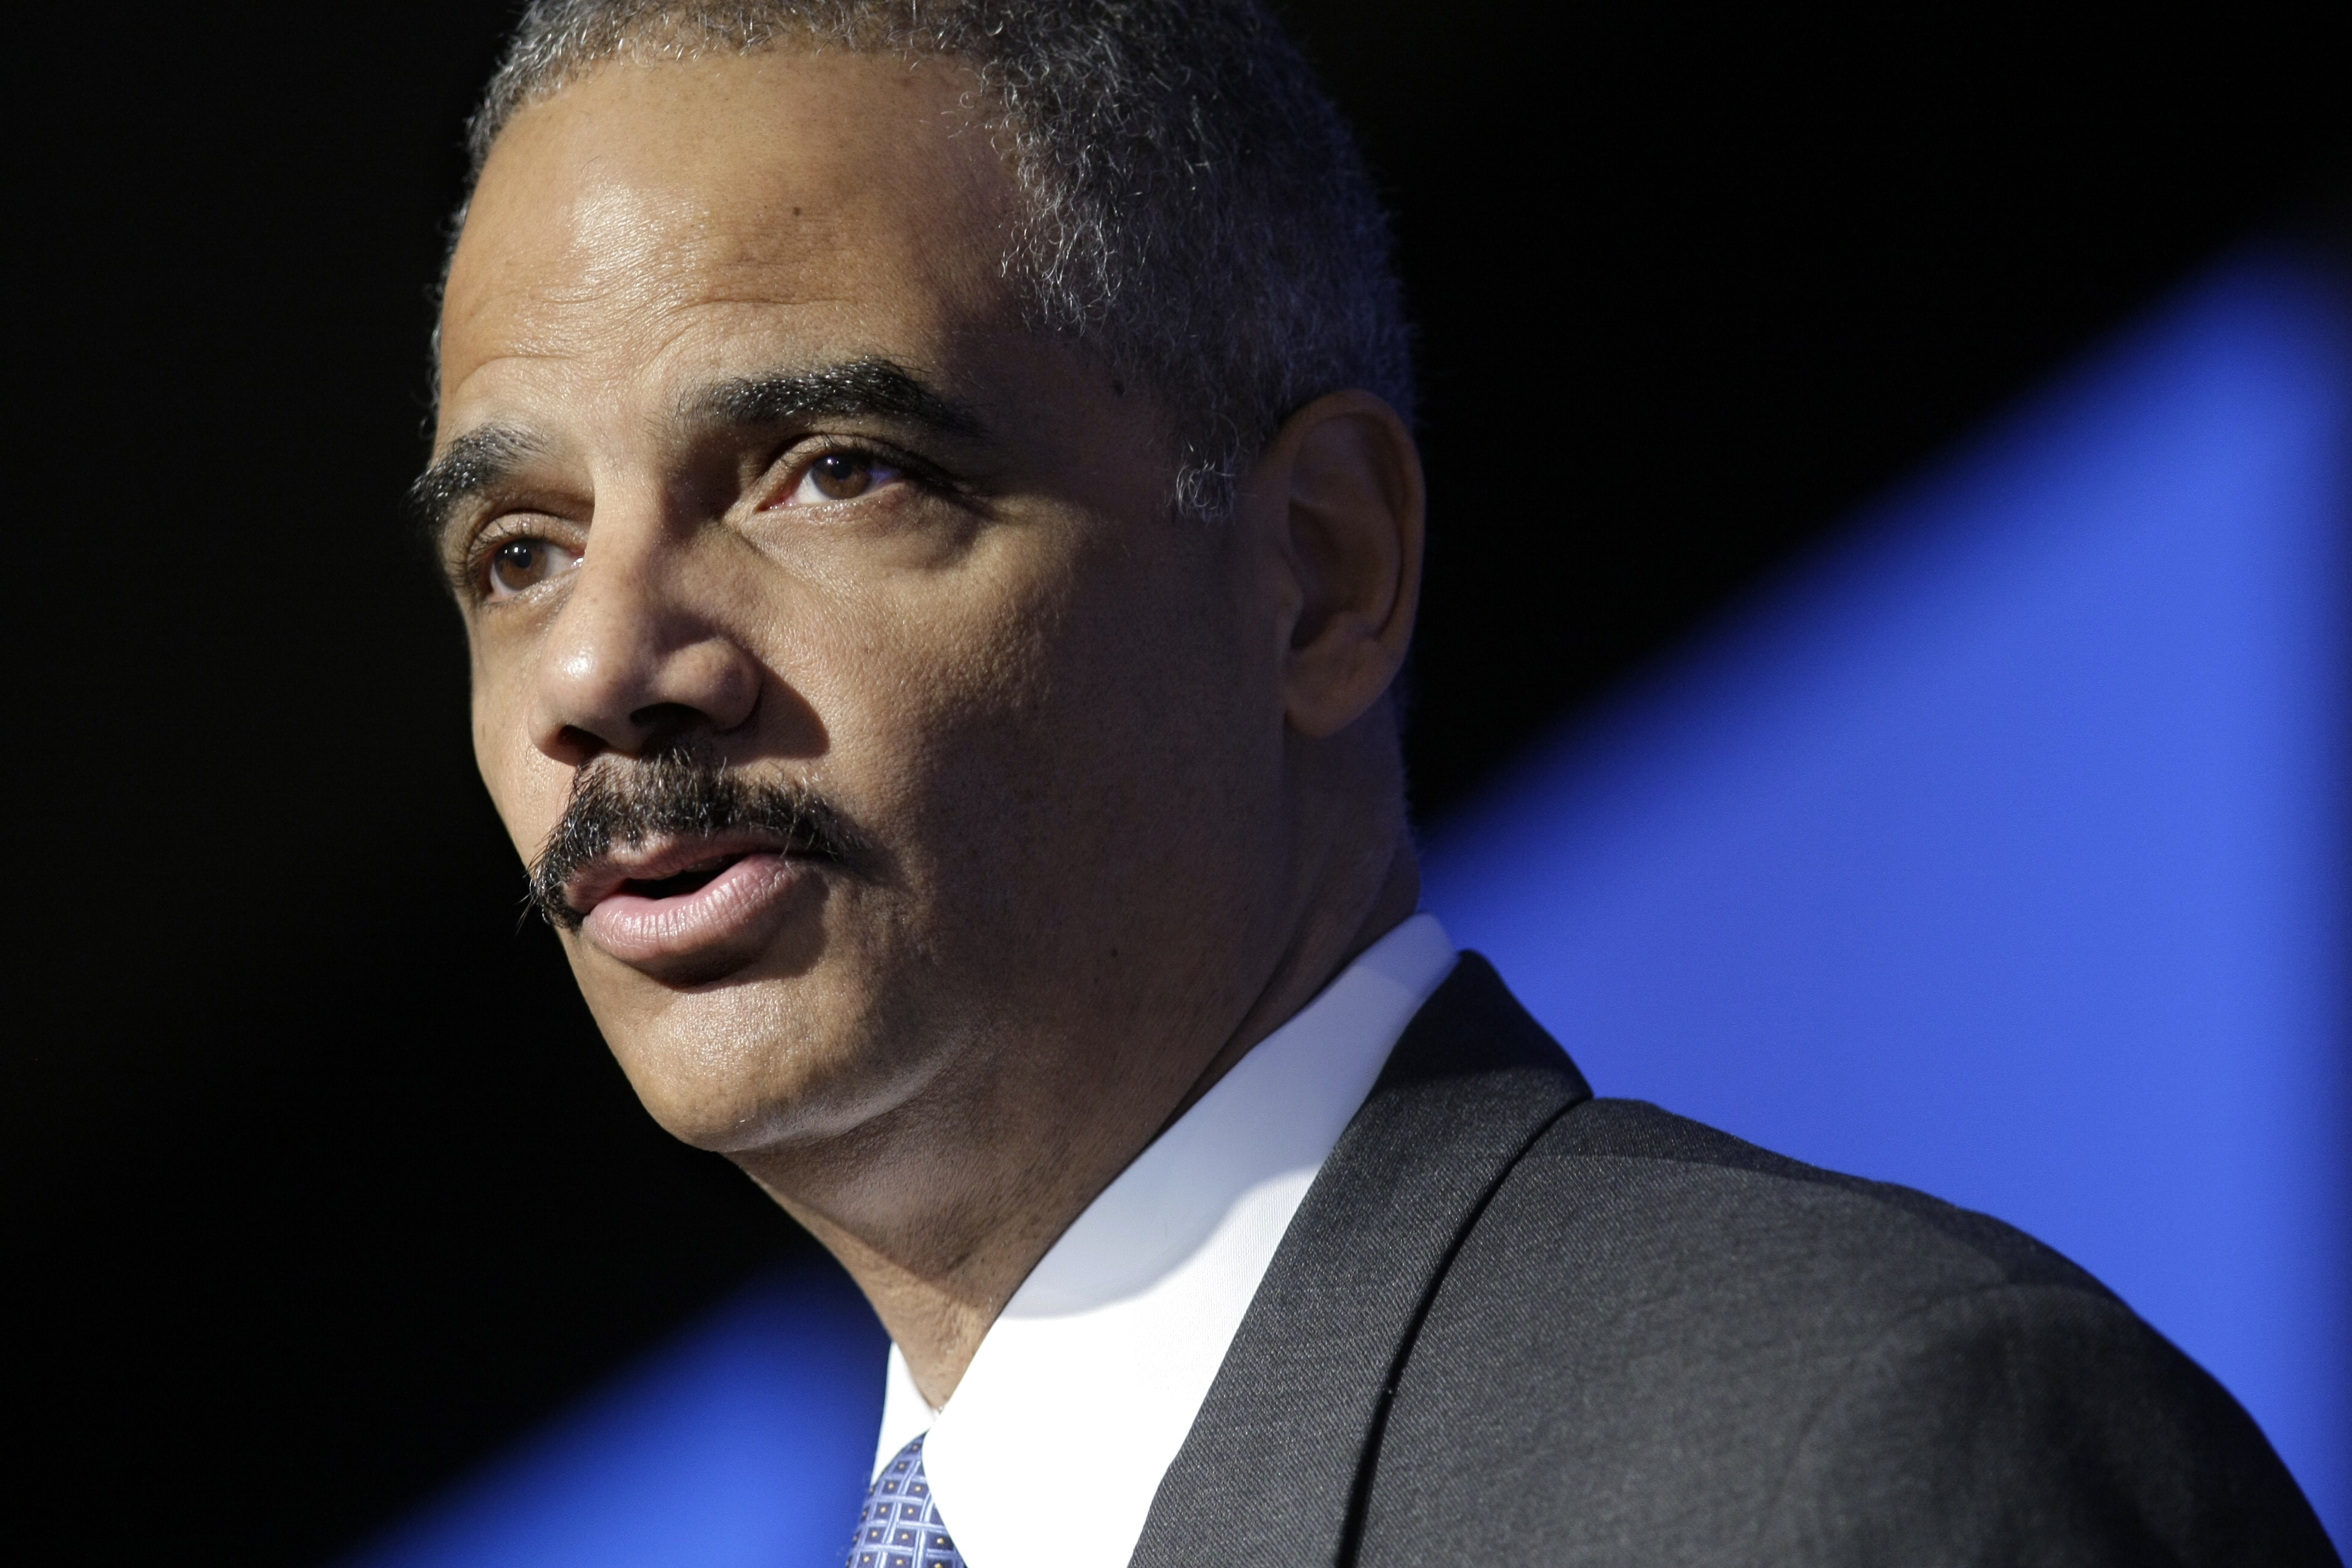 Eric Holder’s Voting Rights Legacy